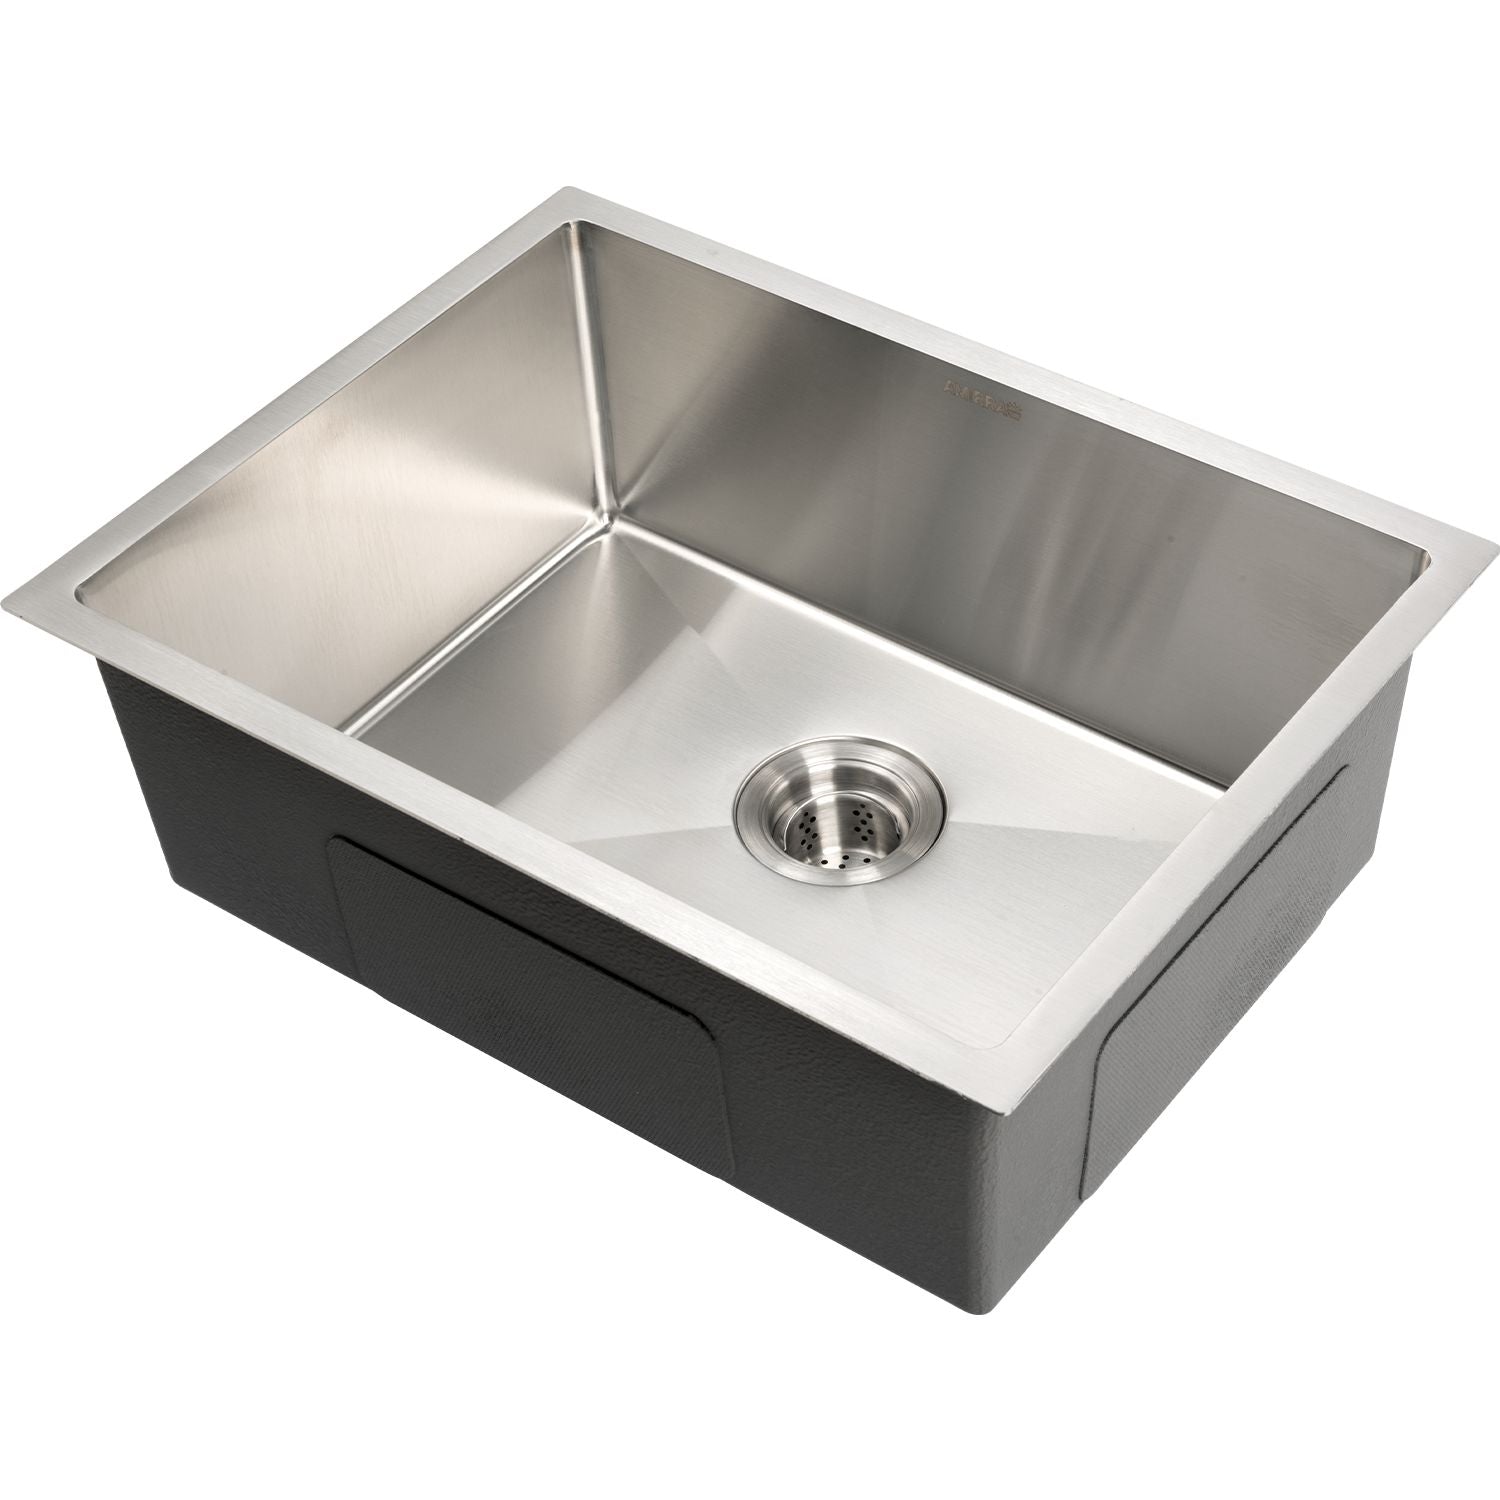 AMIRRA Kitchen Stainless Steel Sink 440mm x 340mm with Nano Coating (Silver Black)